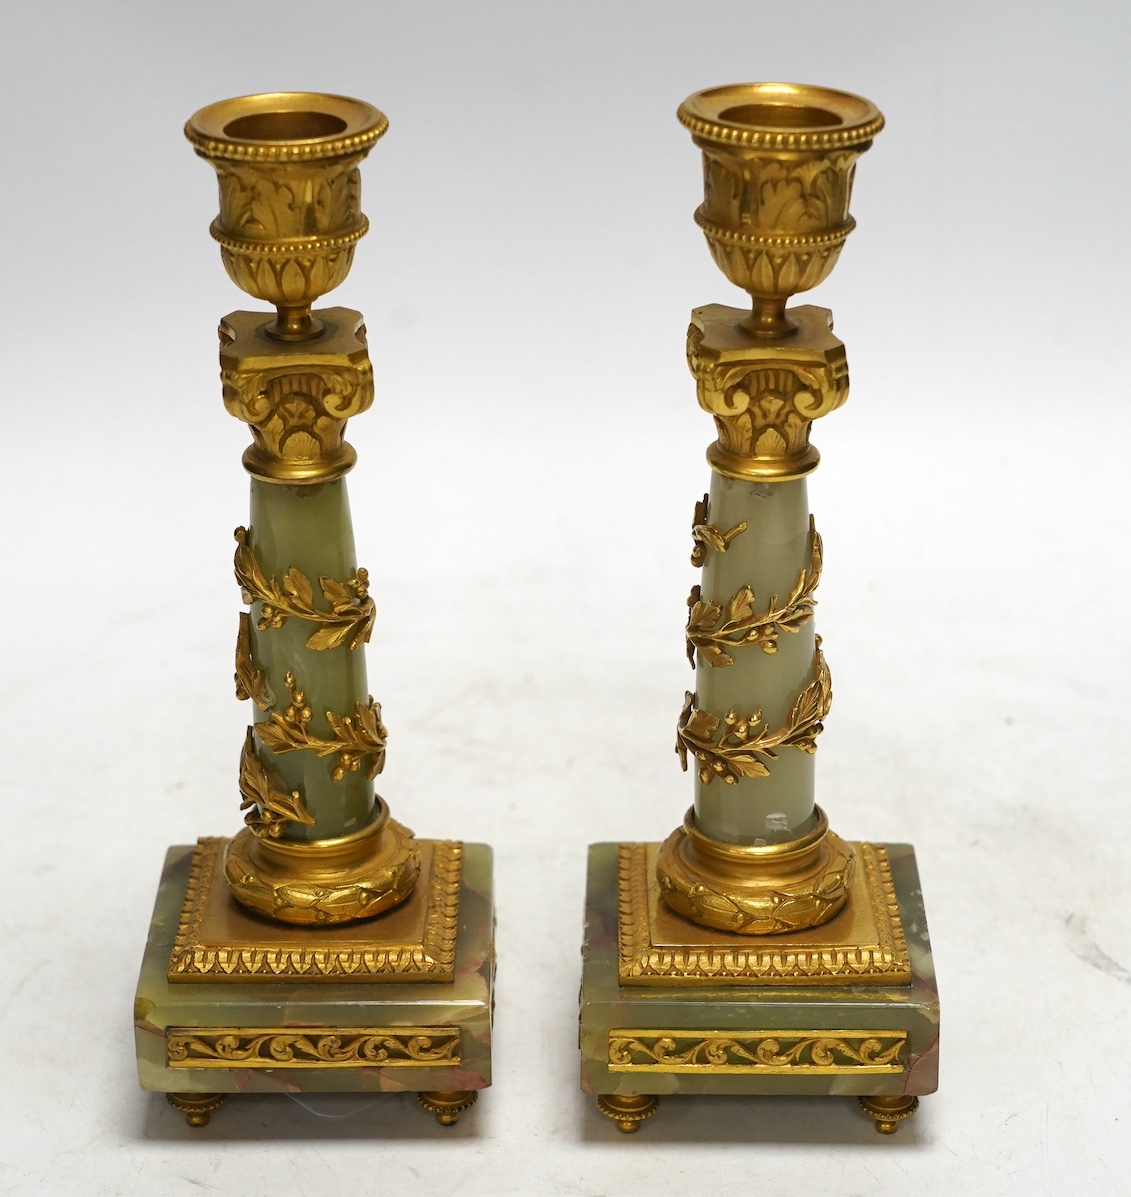 A pair of early 20th century French ormolu mounted onyx candlesticks, 20cm high